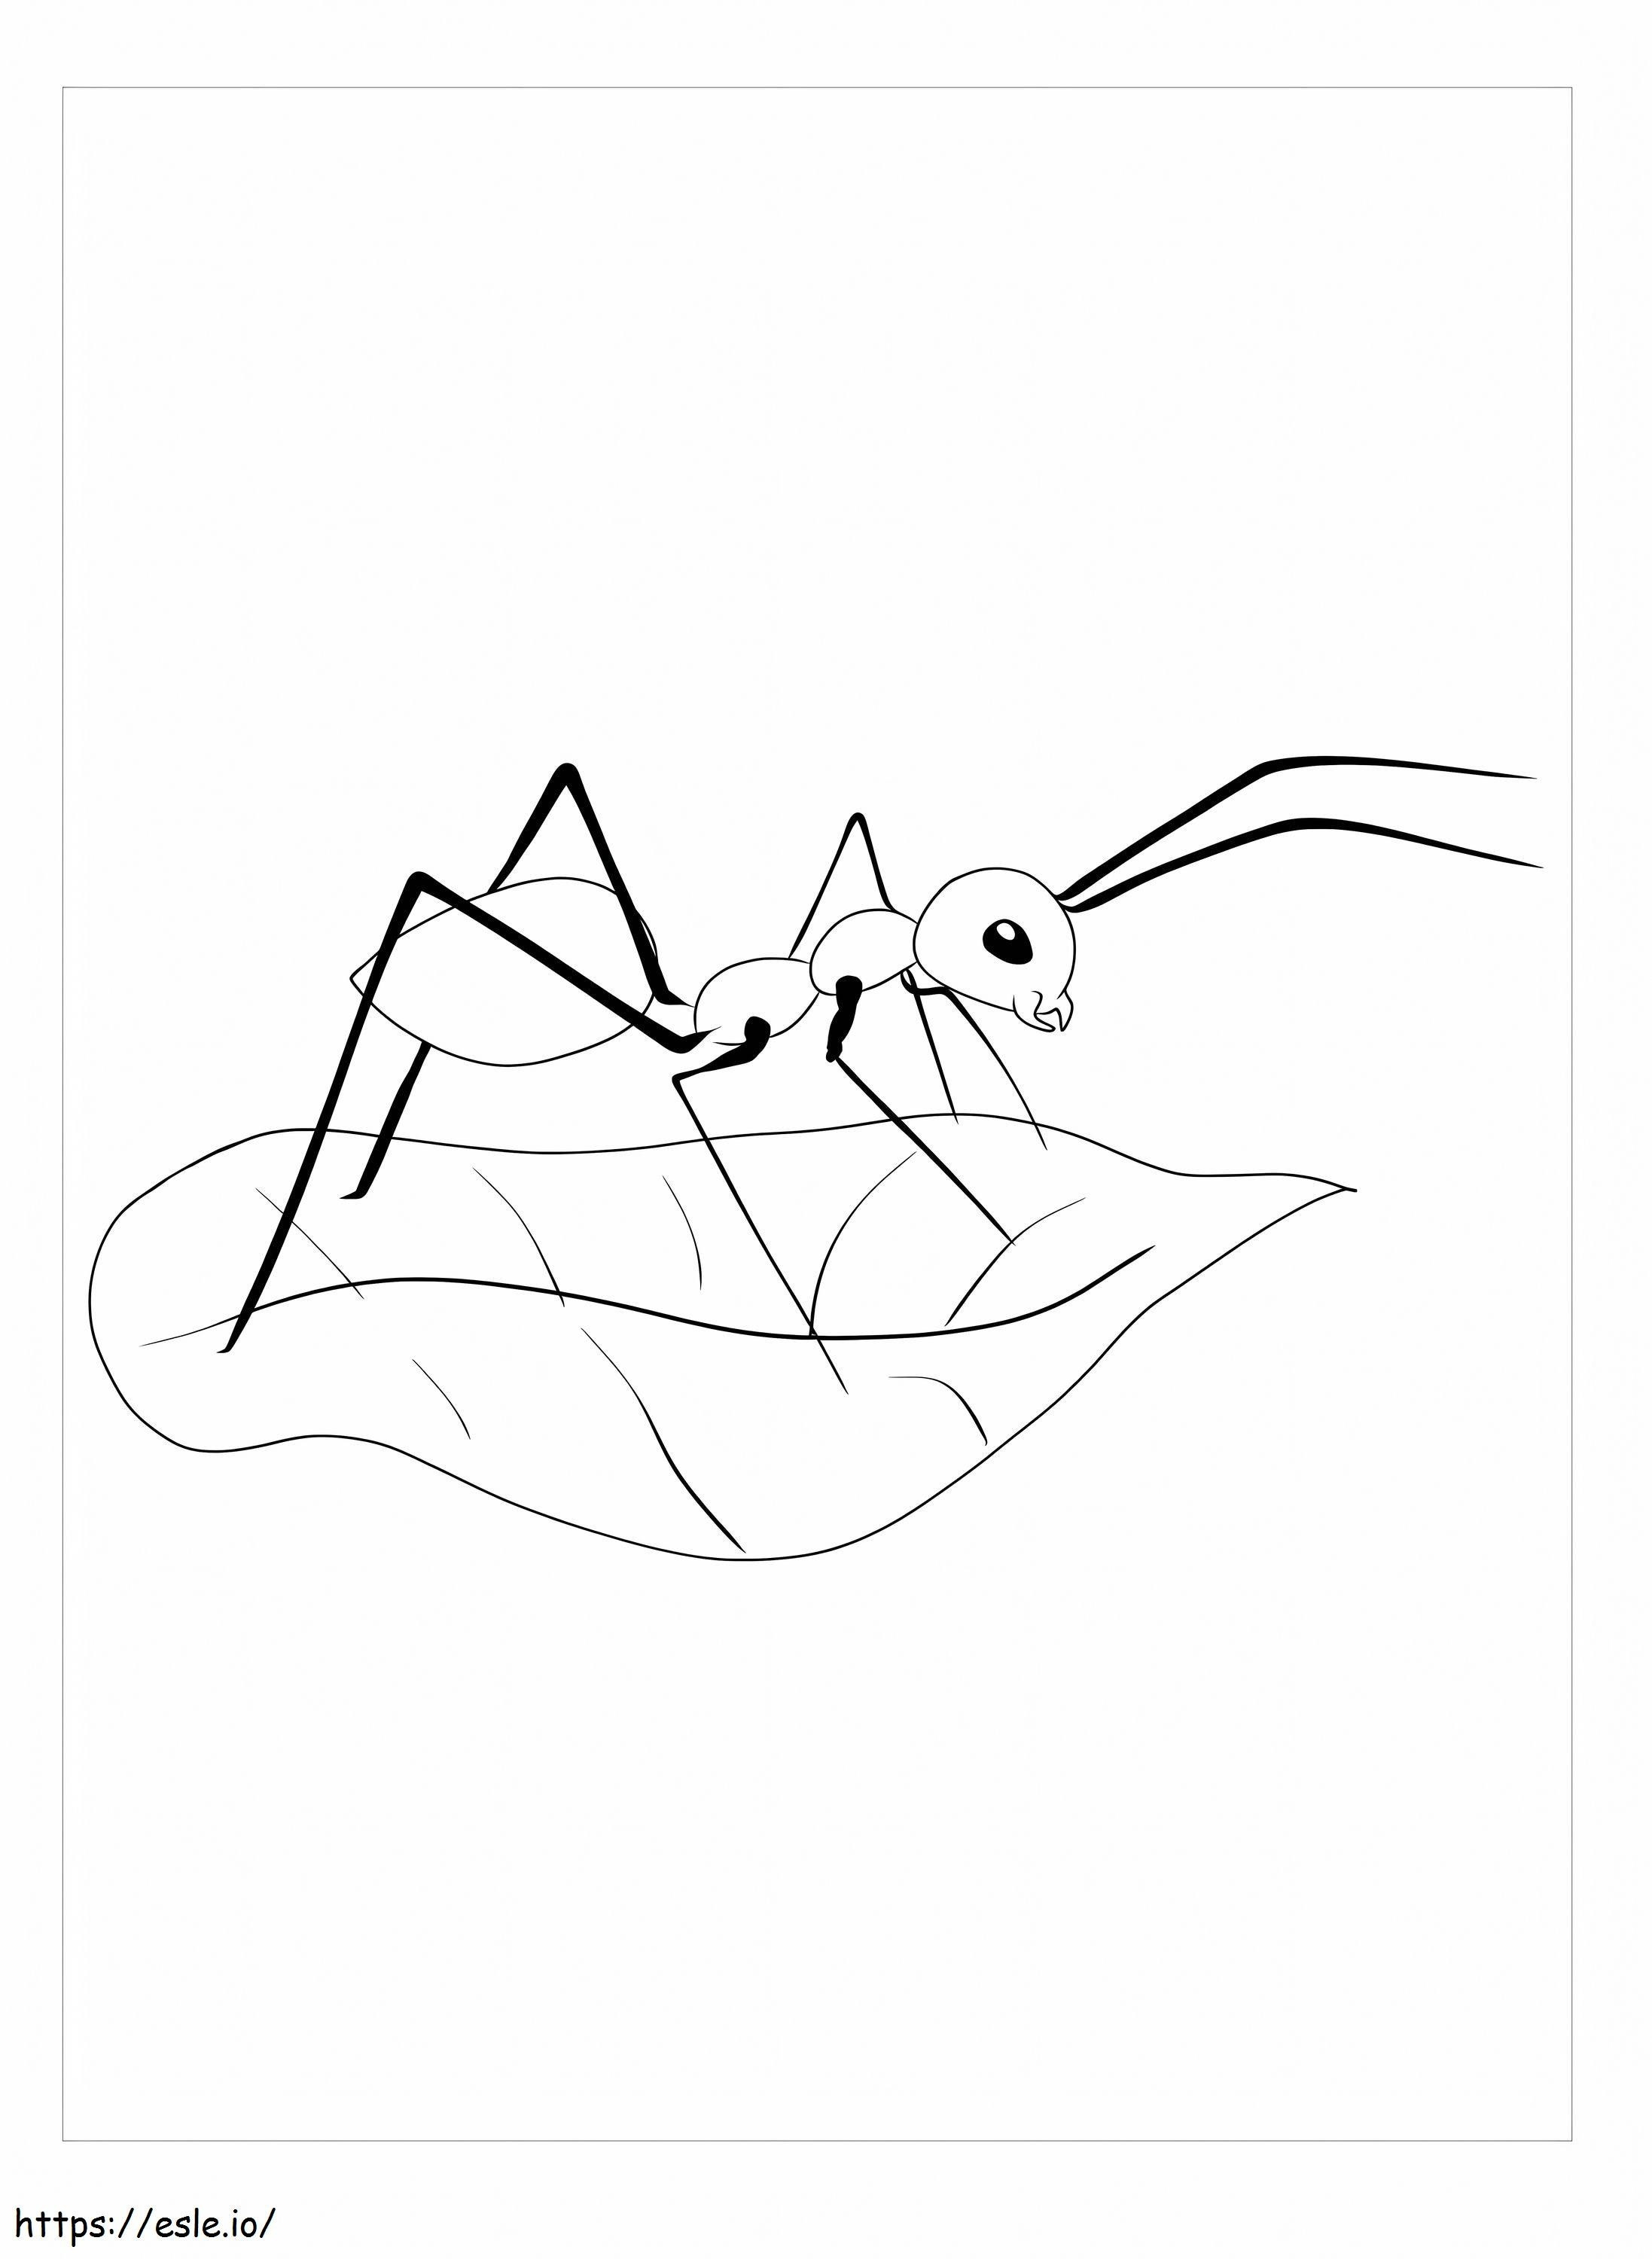 Leafcutter Ant coloring page